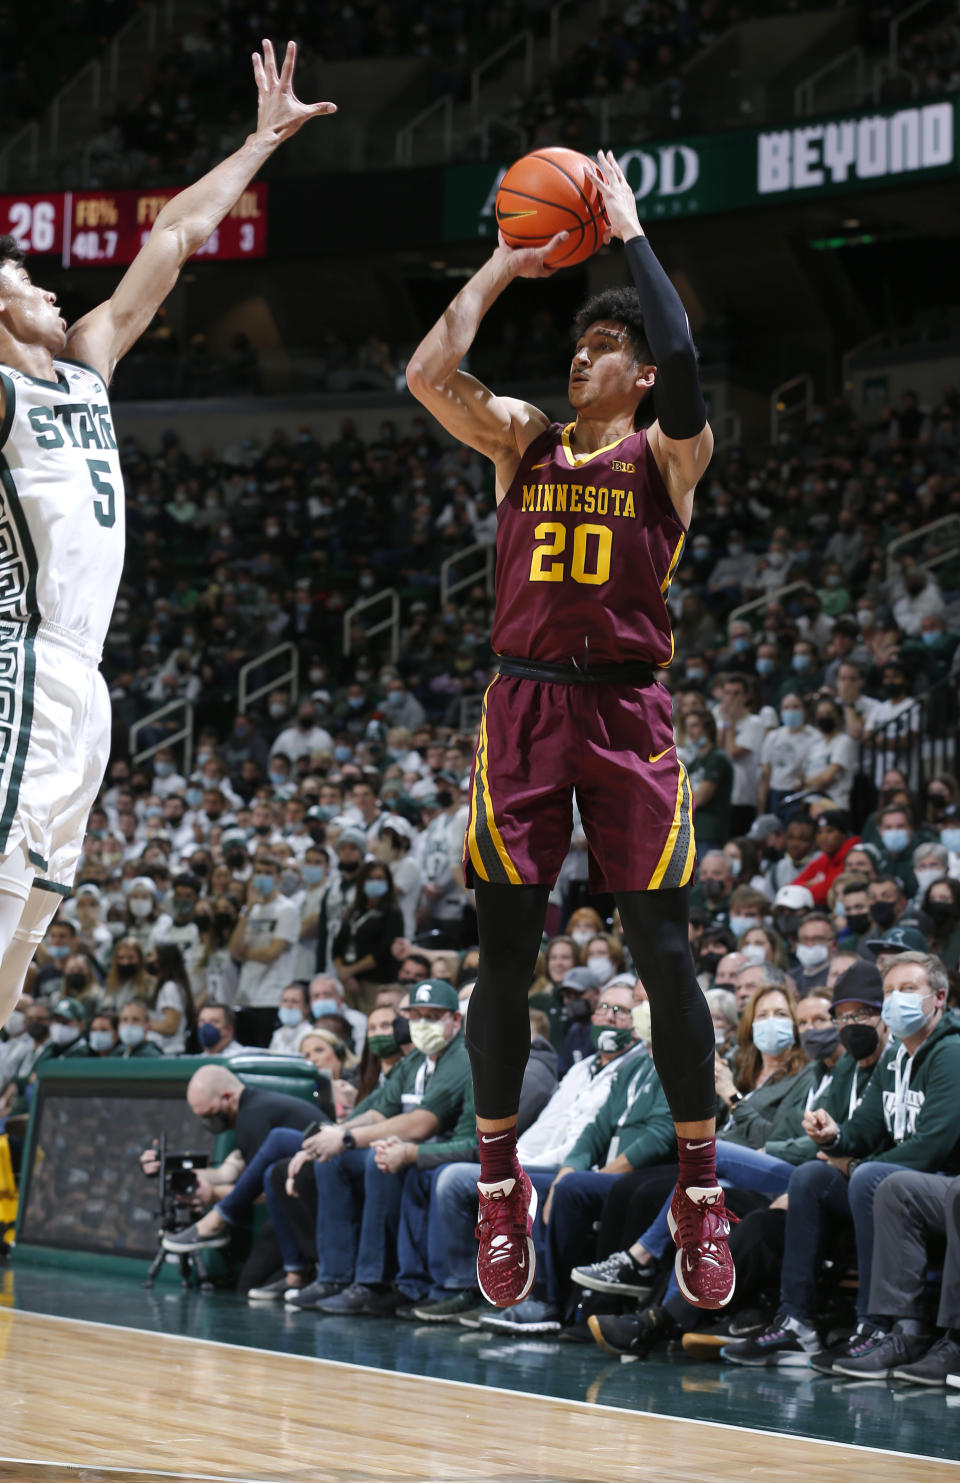 Minnesota's Eylijah Stephens, right, shoots against Michigan State's Max Christie (5) during the first half of an NCAA college basketball game, Wednesday, Jan. 12, 2022, in East Lansing, Mich. (AP Photo/Al Goldis)